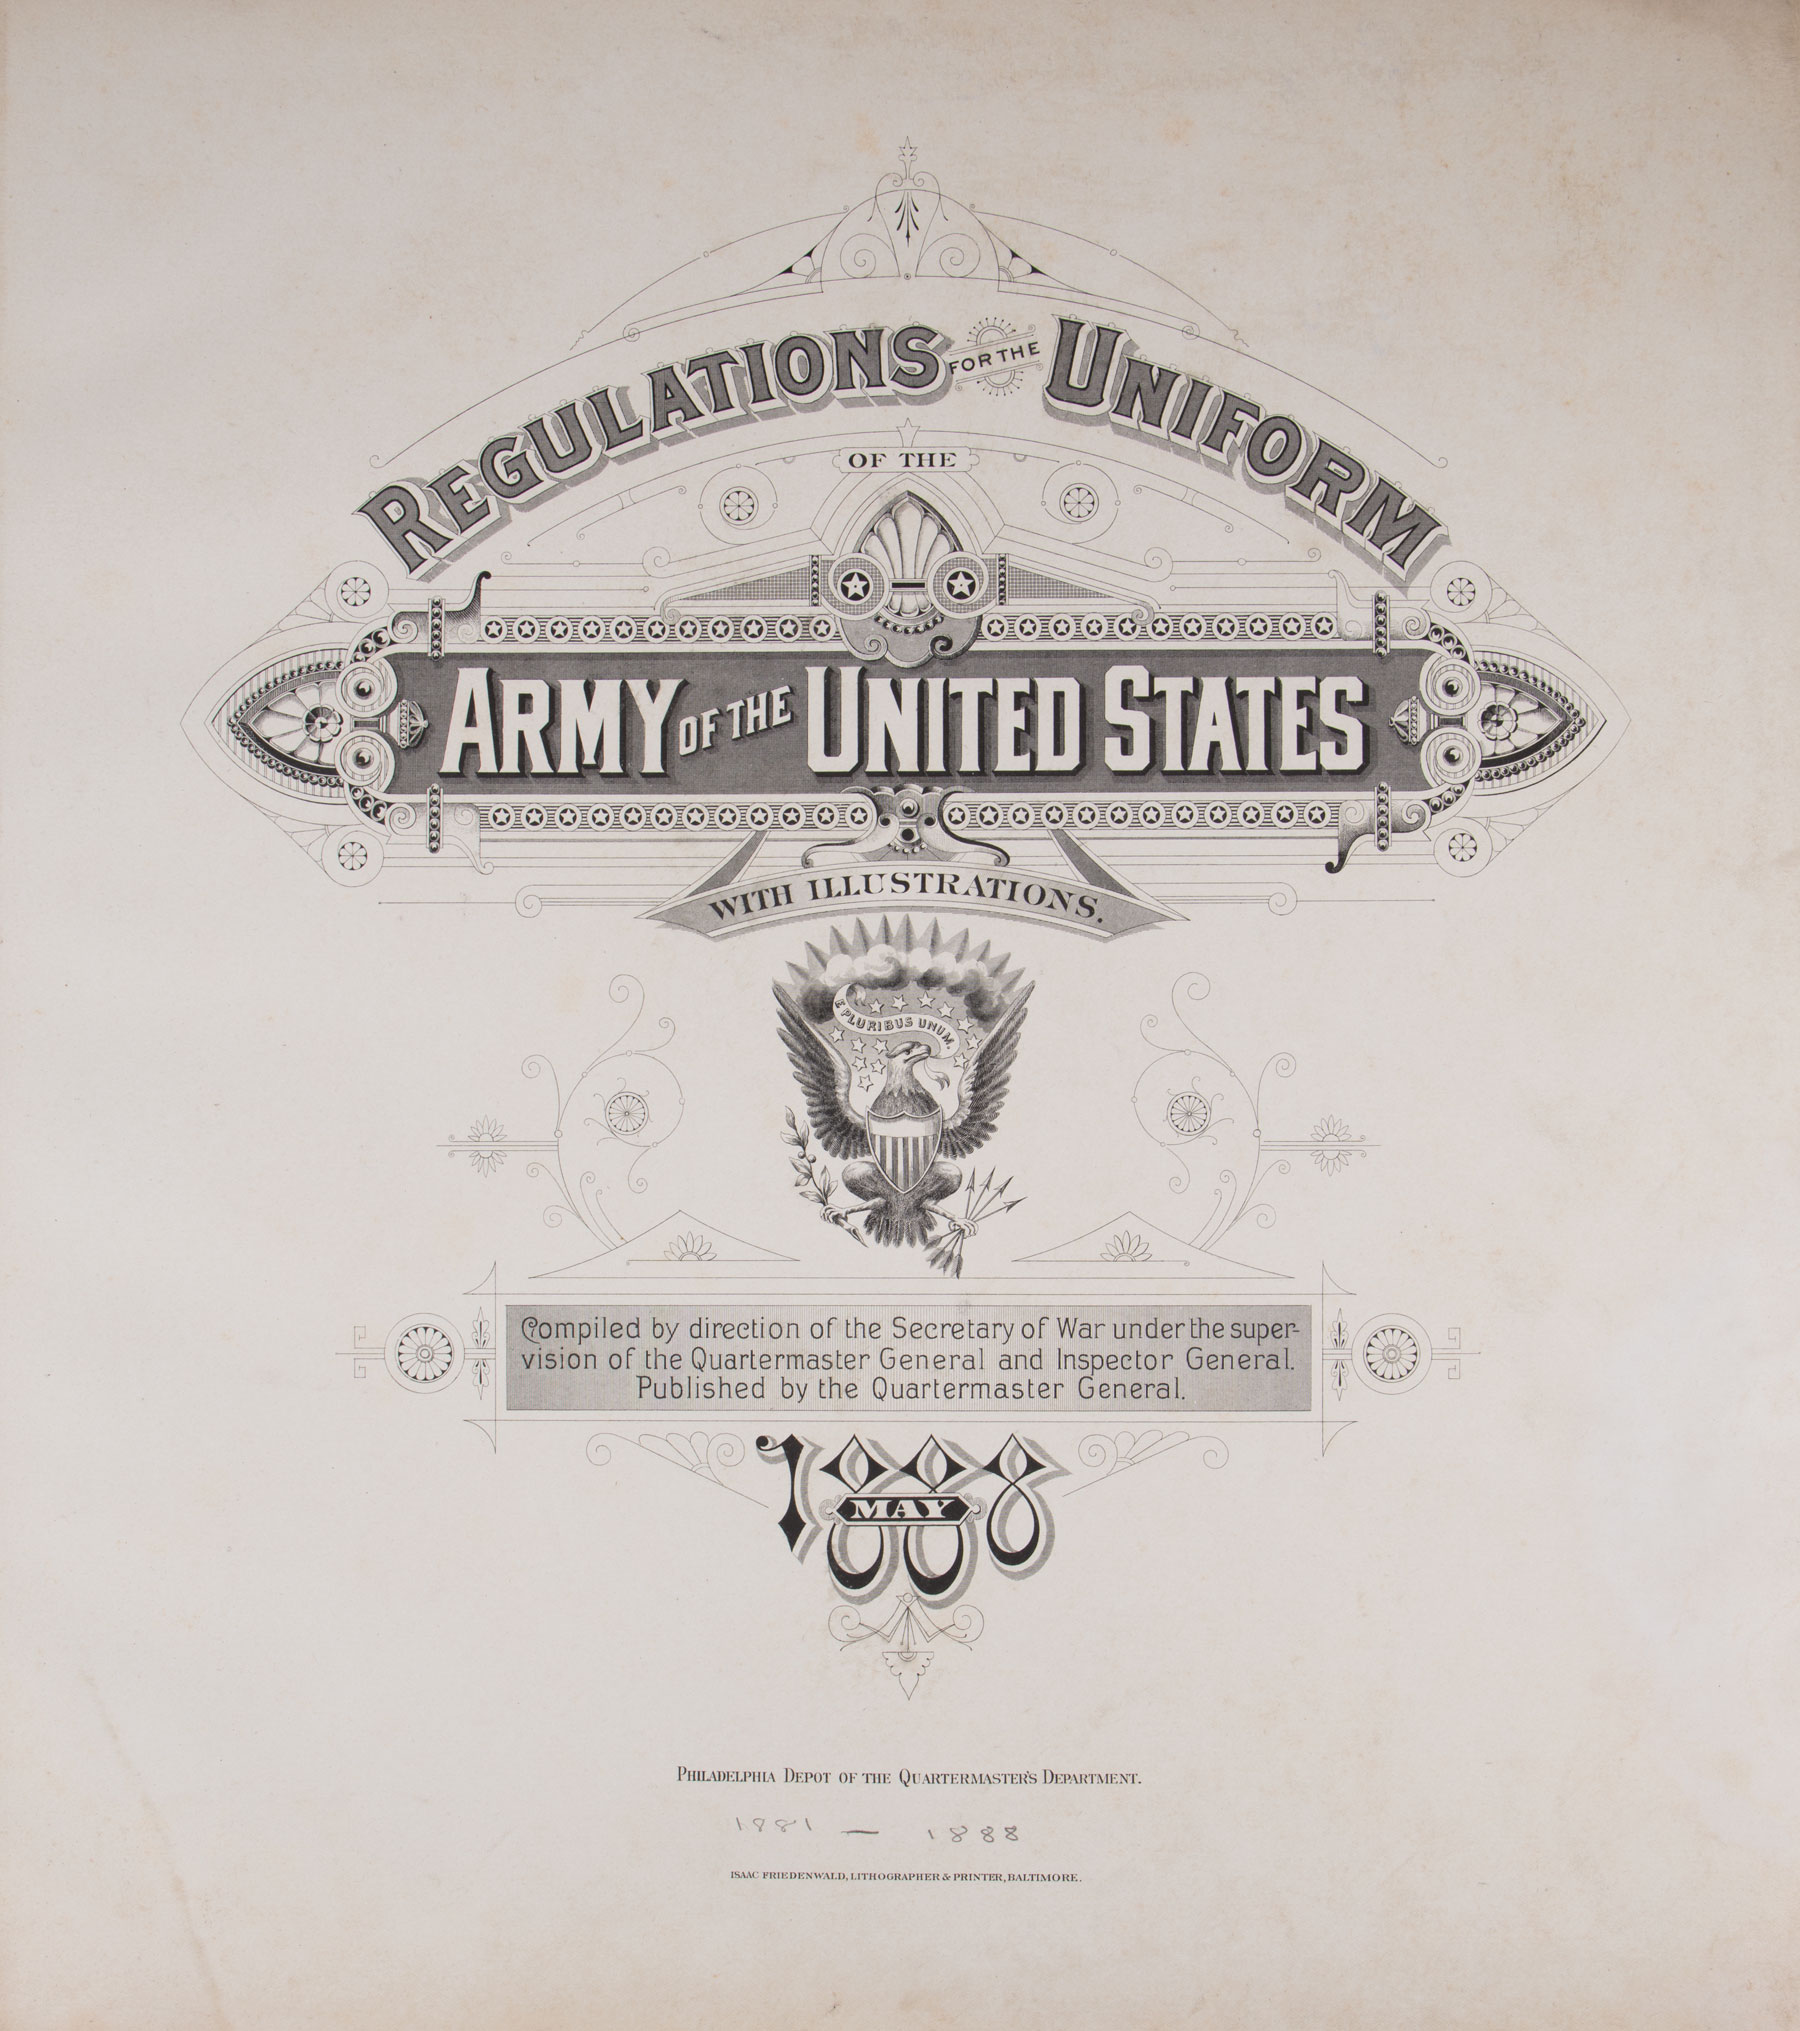 Antique Prints of US Army Uniforms, Regulations for the Uniform of the Army of the United States - Image 2 of 3